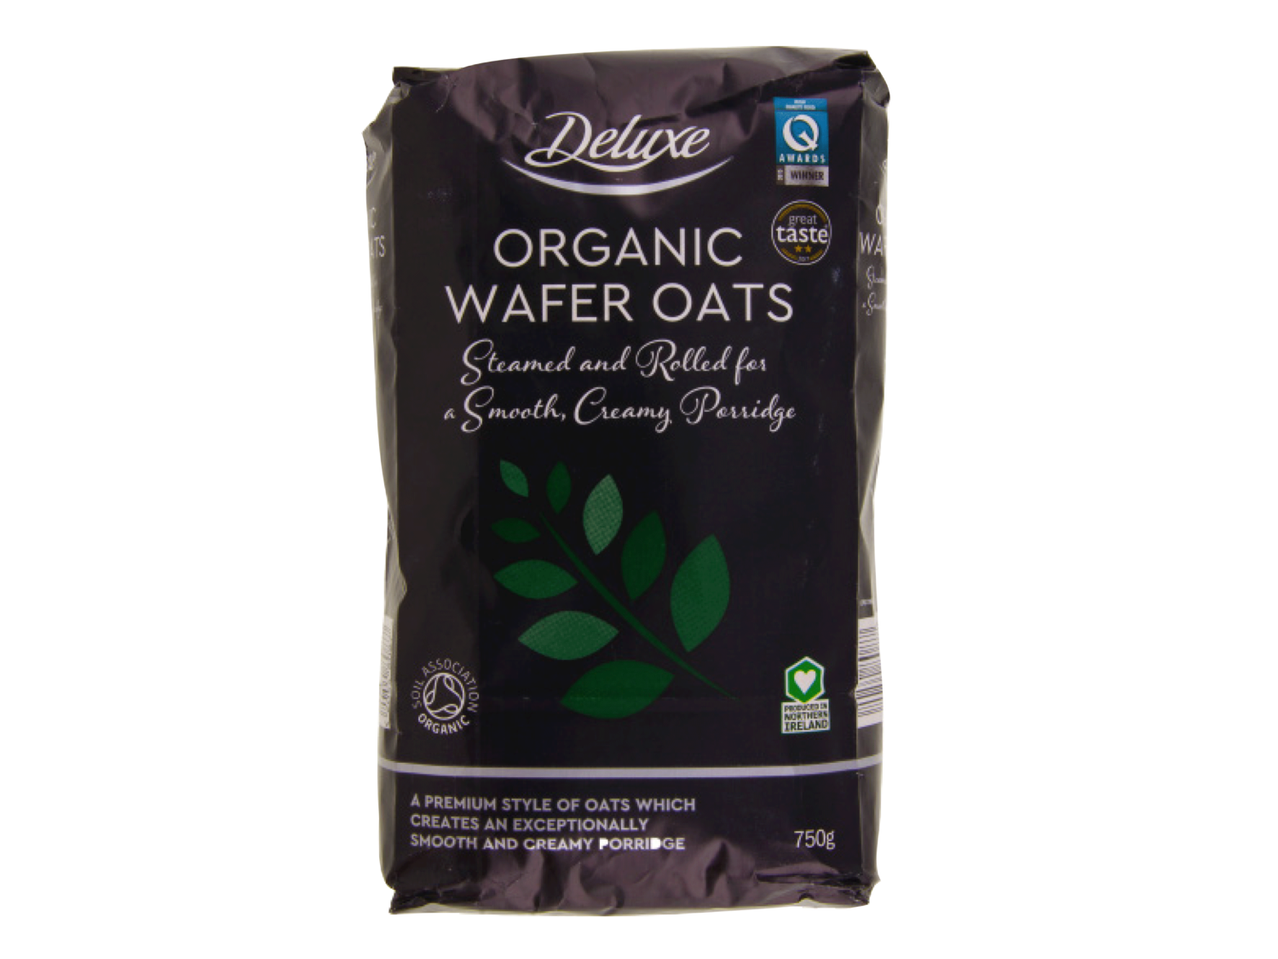 Go to full screen view: DELUXE® Organic Wafer Oats - Image 1